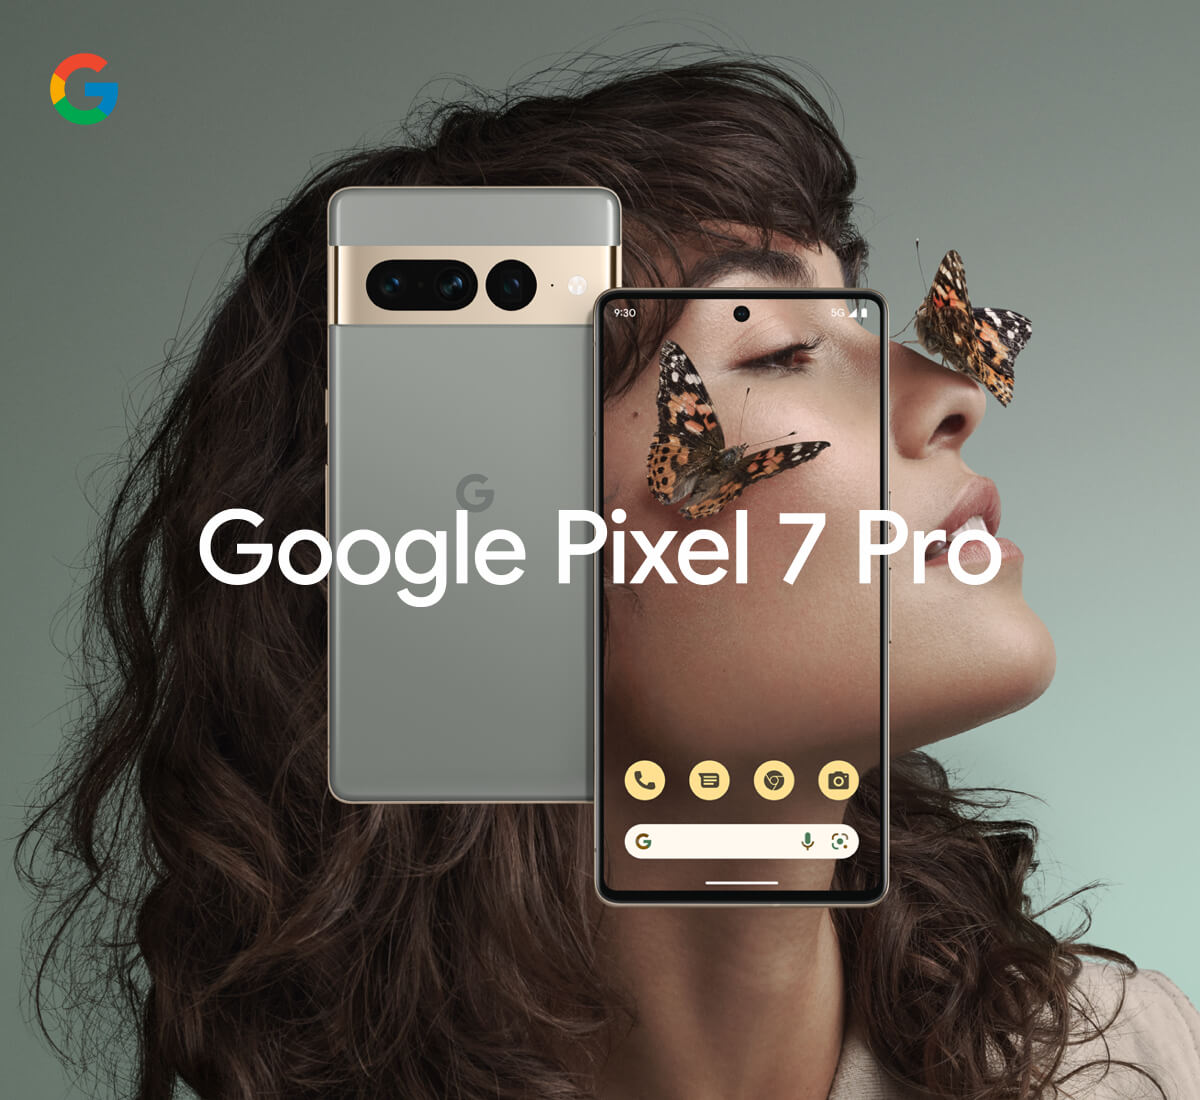 a woman’s face in profile with a butterfly on her cheek and nose. 2 Google Pixel 7 phones are shown, front and back.